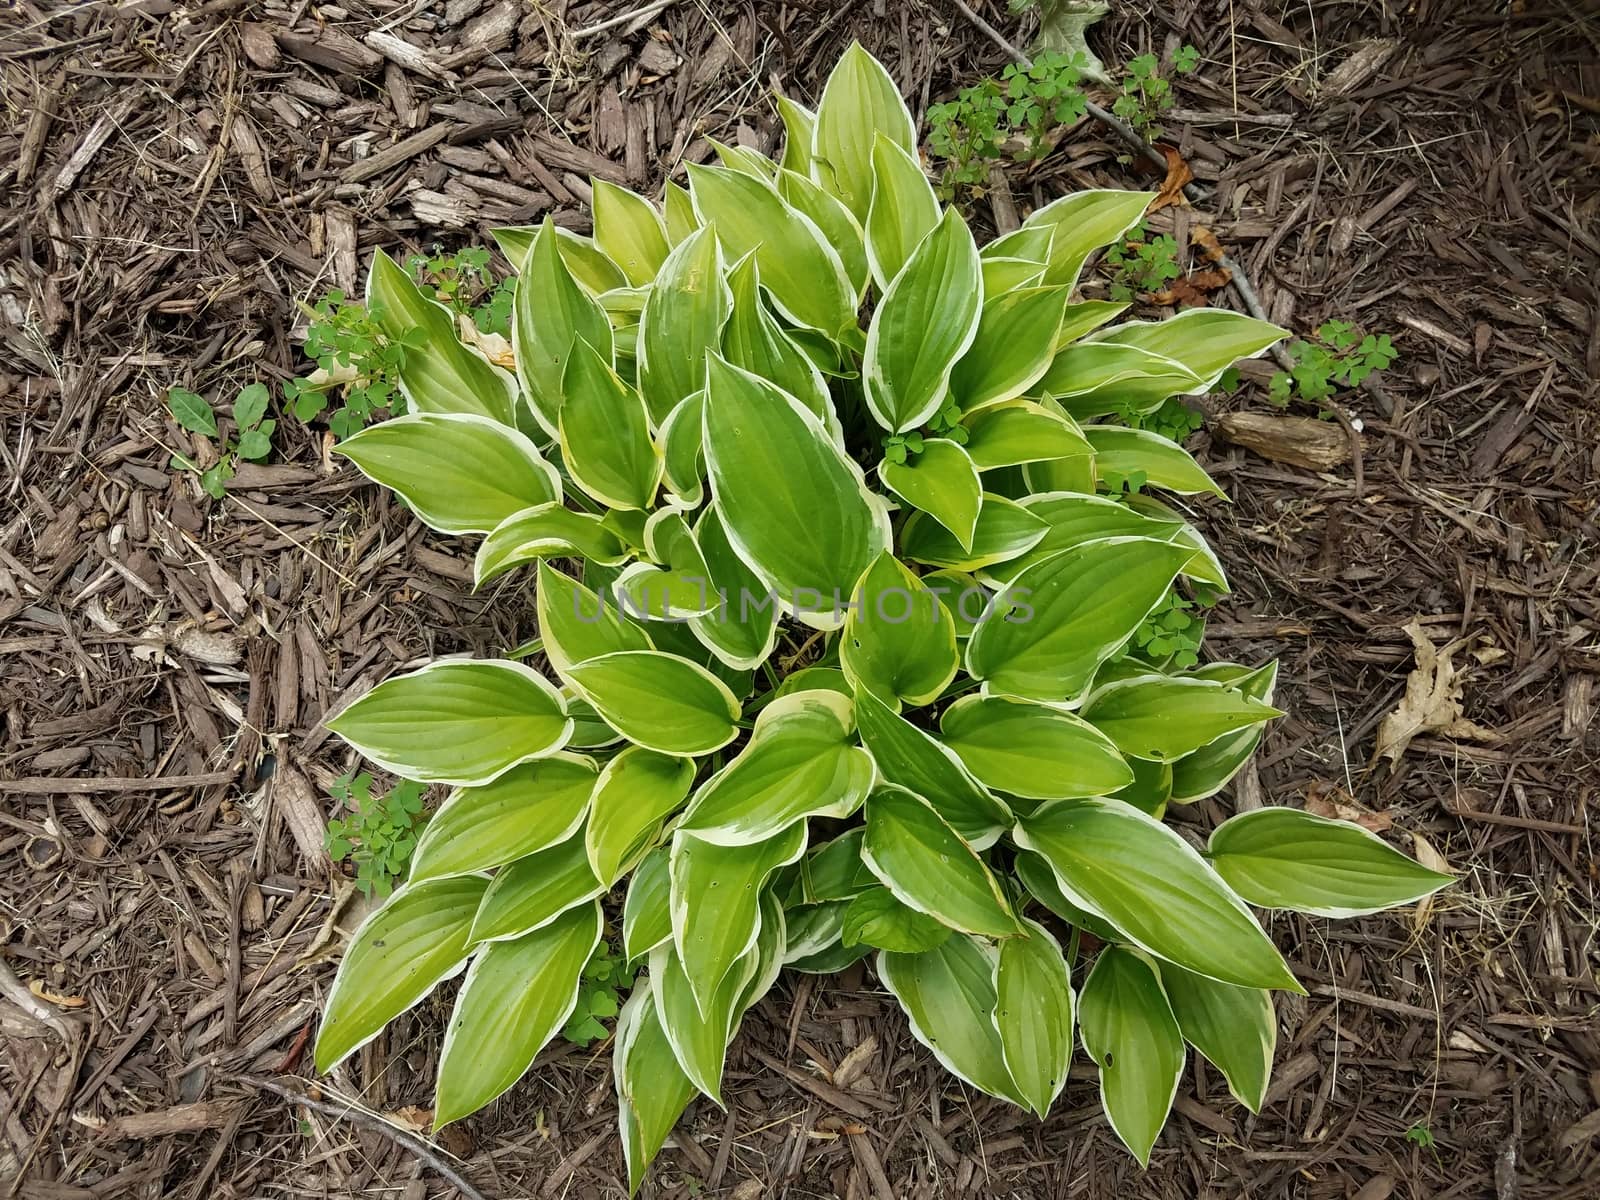 green hosta plant in mulch with clover weeds by stockphotofan1